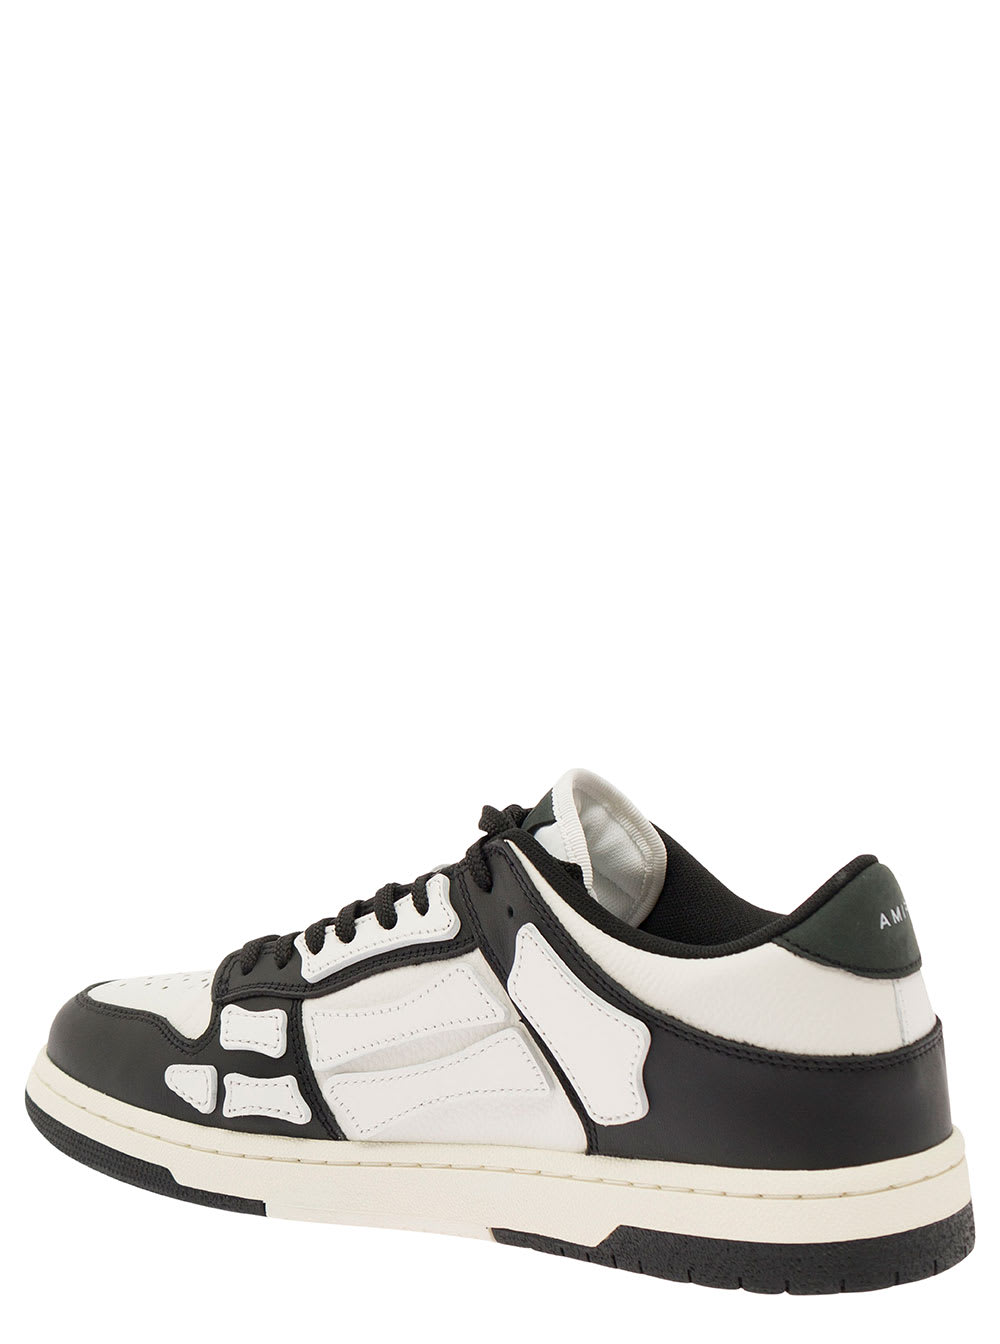 Shop Amiri Skel Top Low White And Black Sneakers With Skeleton Patch In Leather Man In White/black